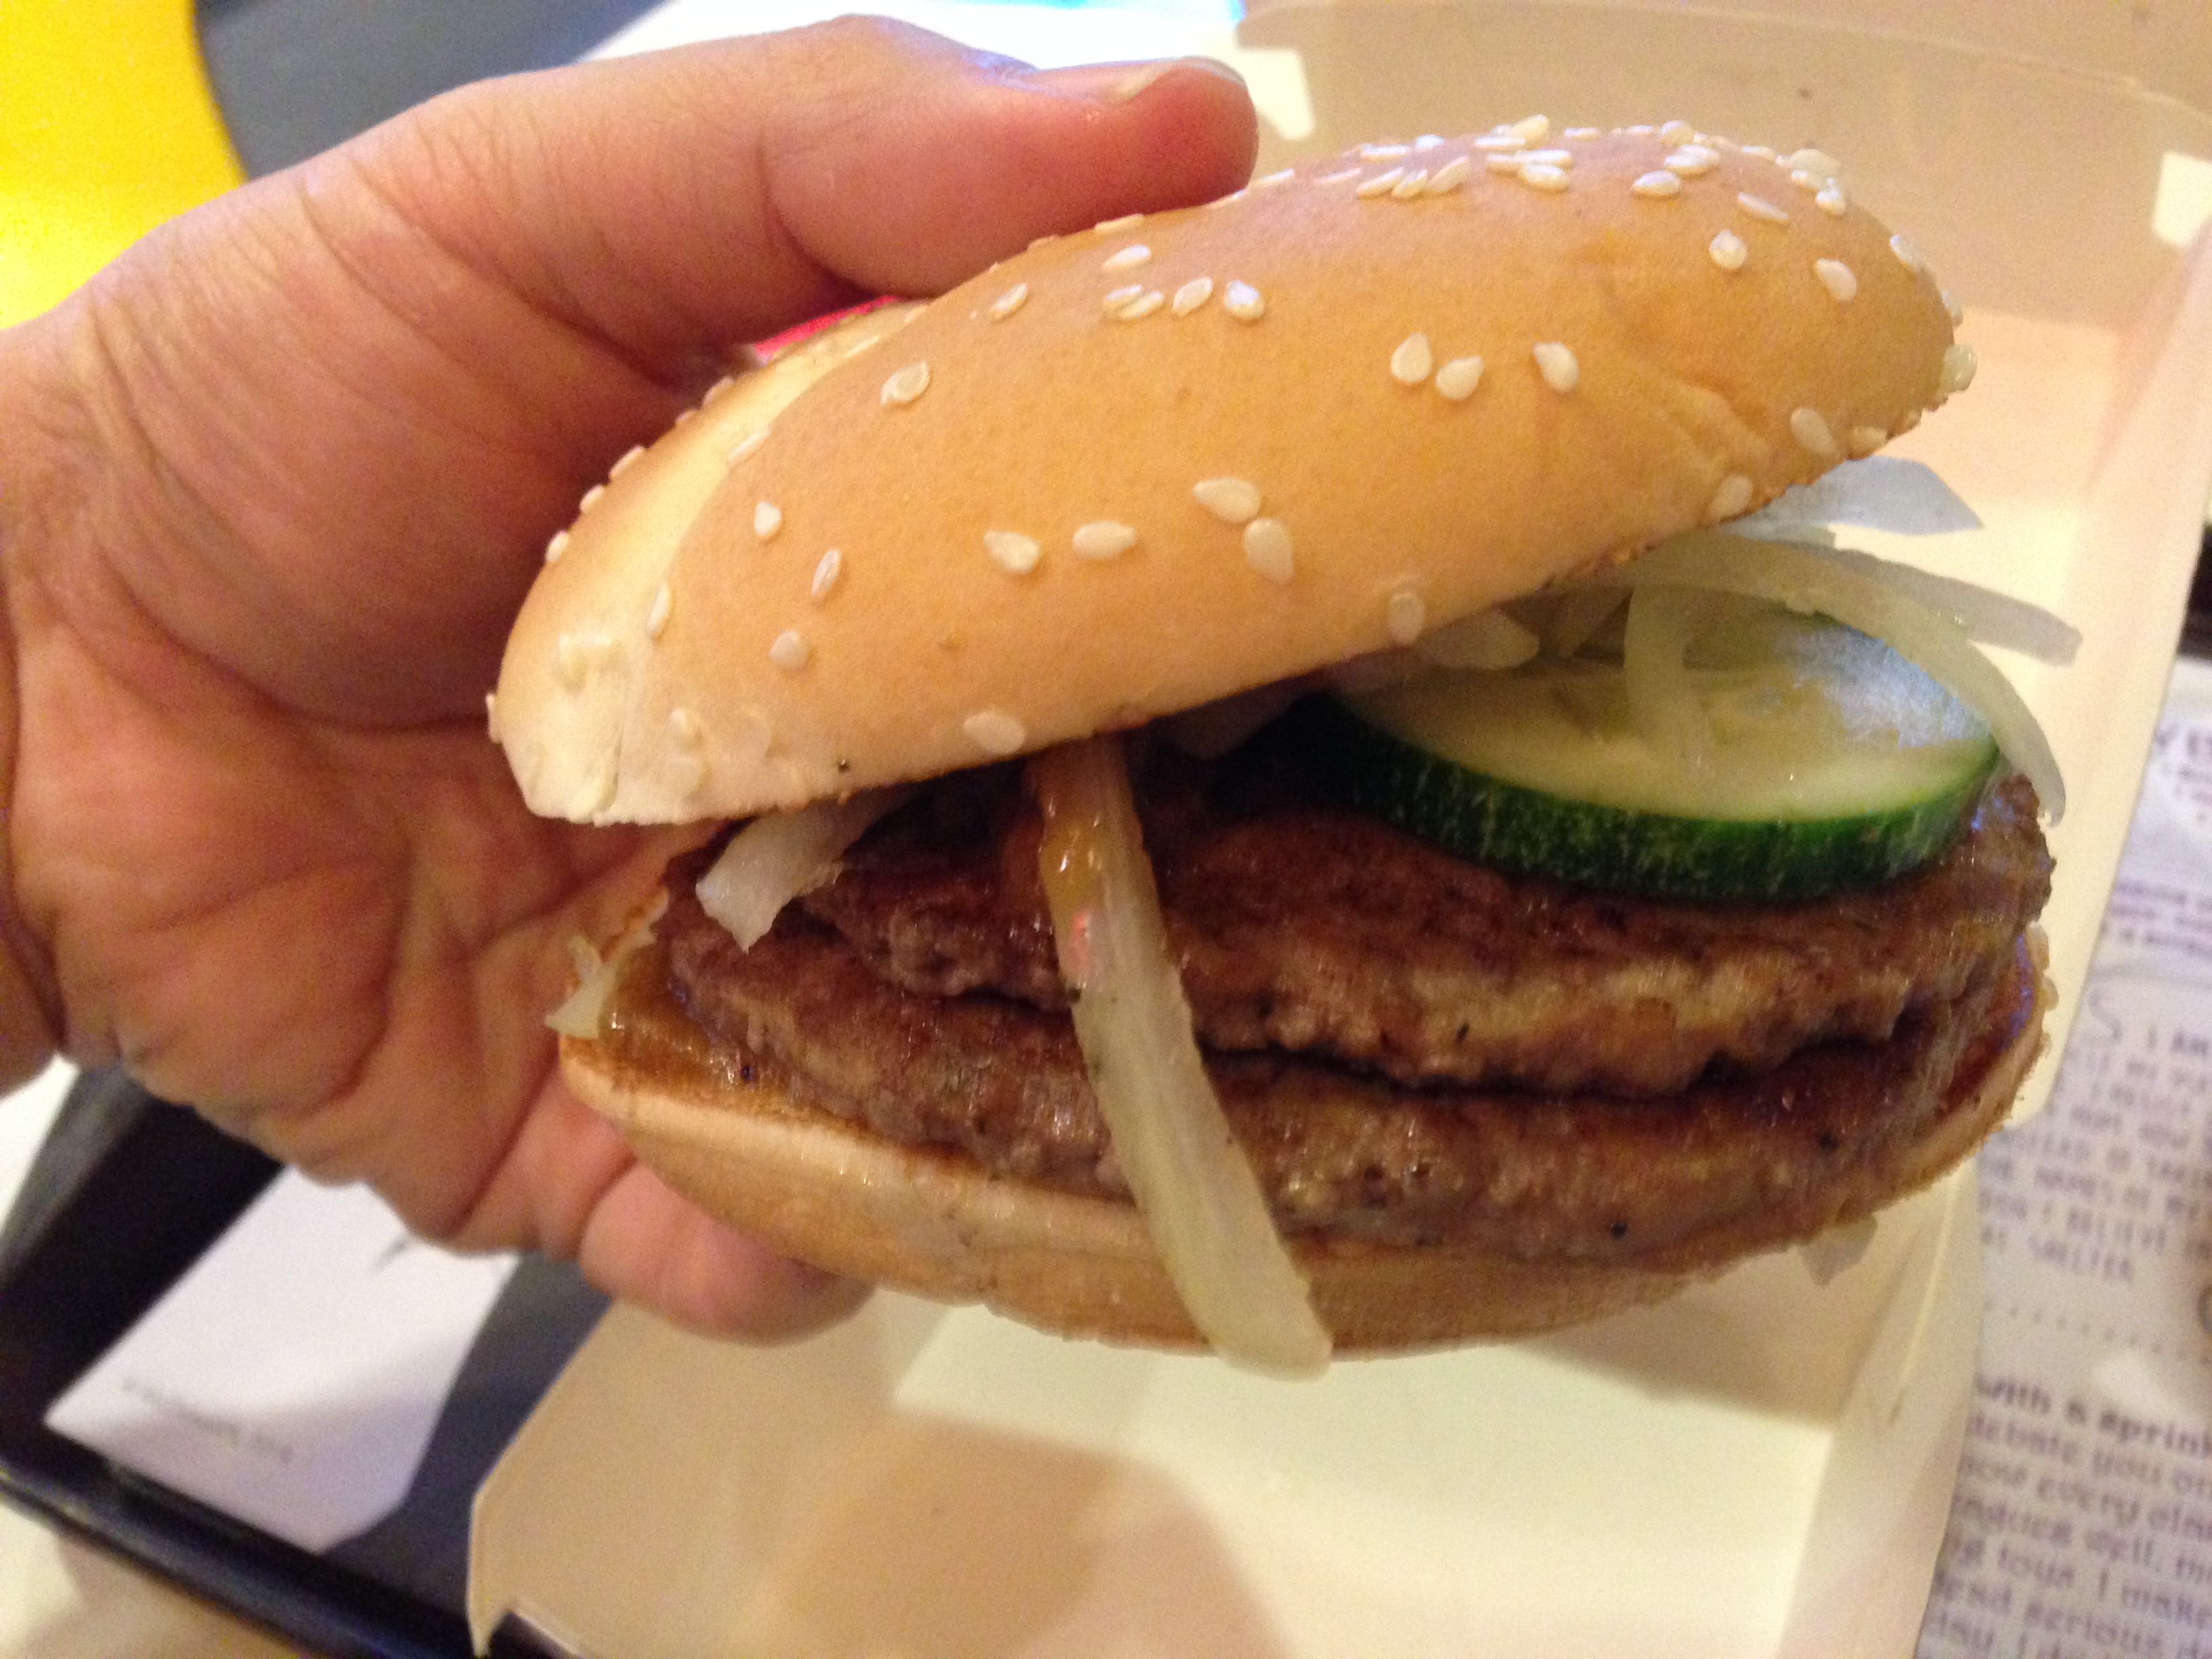 Side view of the burger.